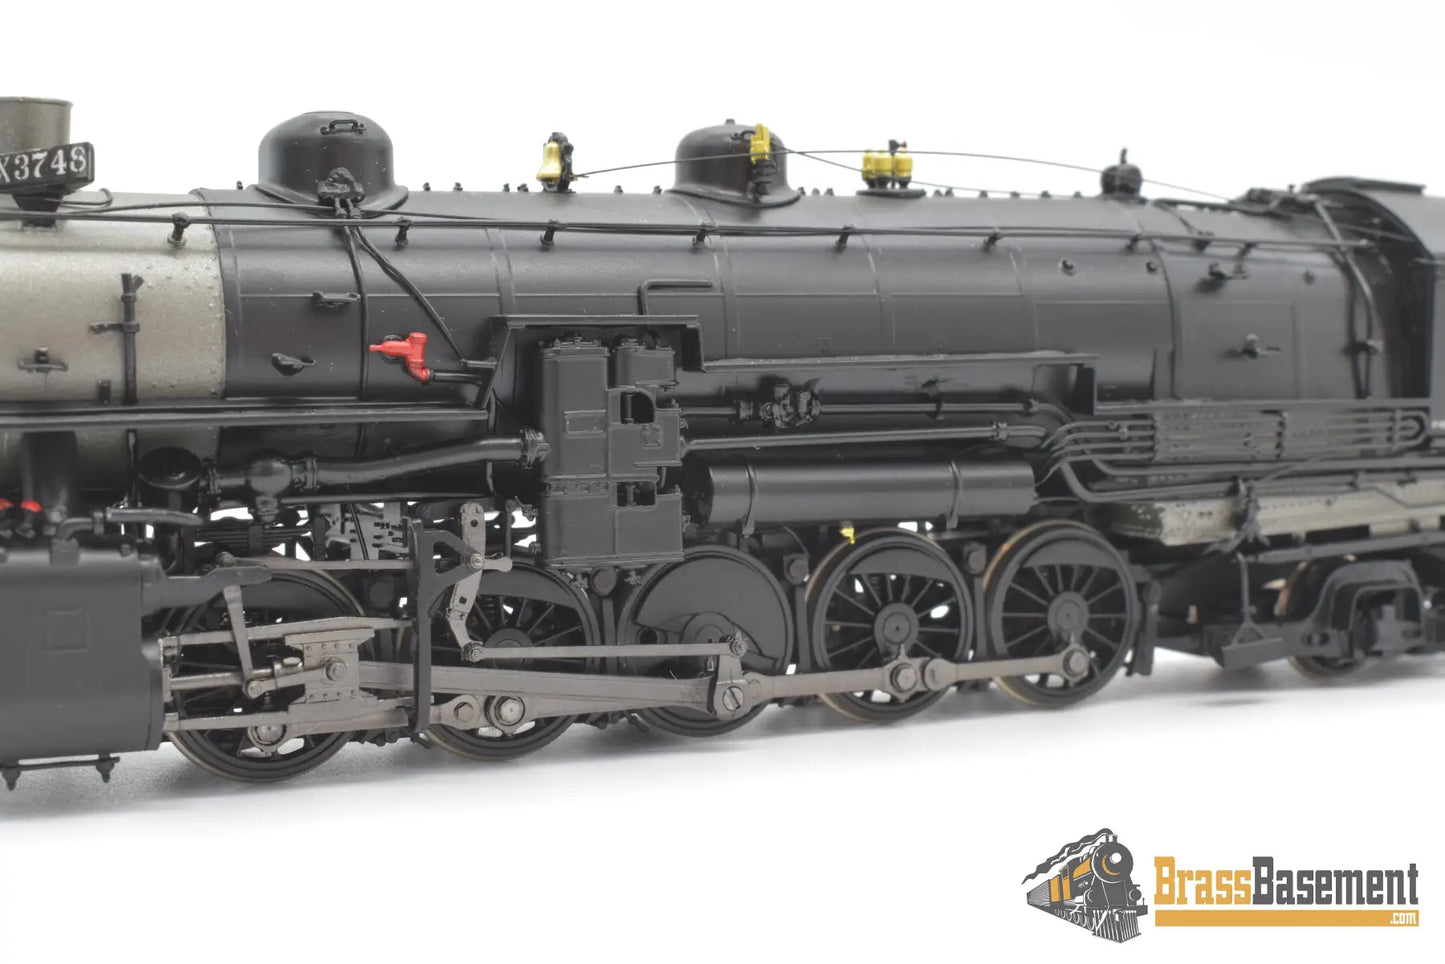 Ho Brass - Gpm 3748.2 Southern Pacific F - 5 2 - 10 - 2 #3748 Factory Paint 252 - R - 1 Tender!